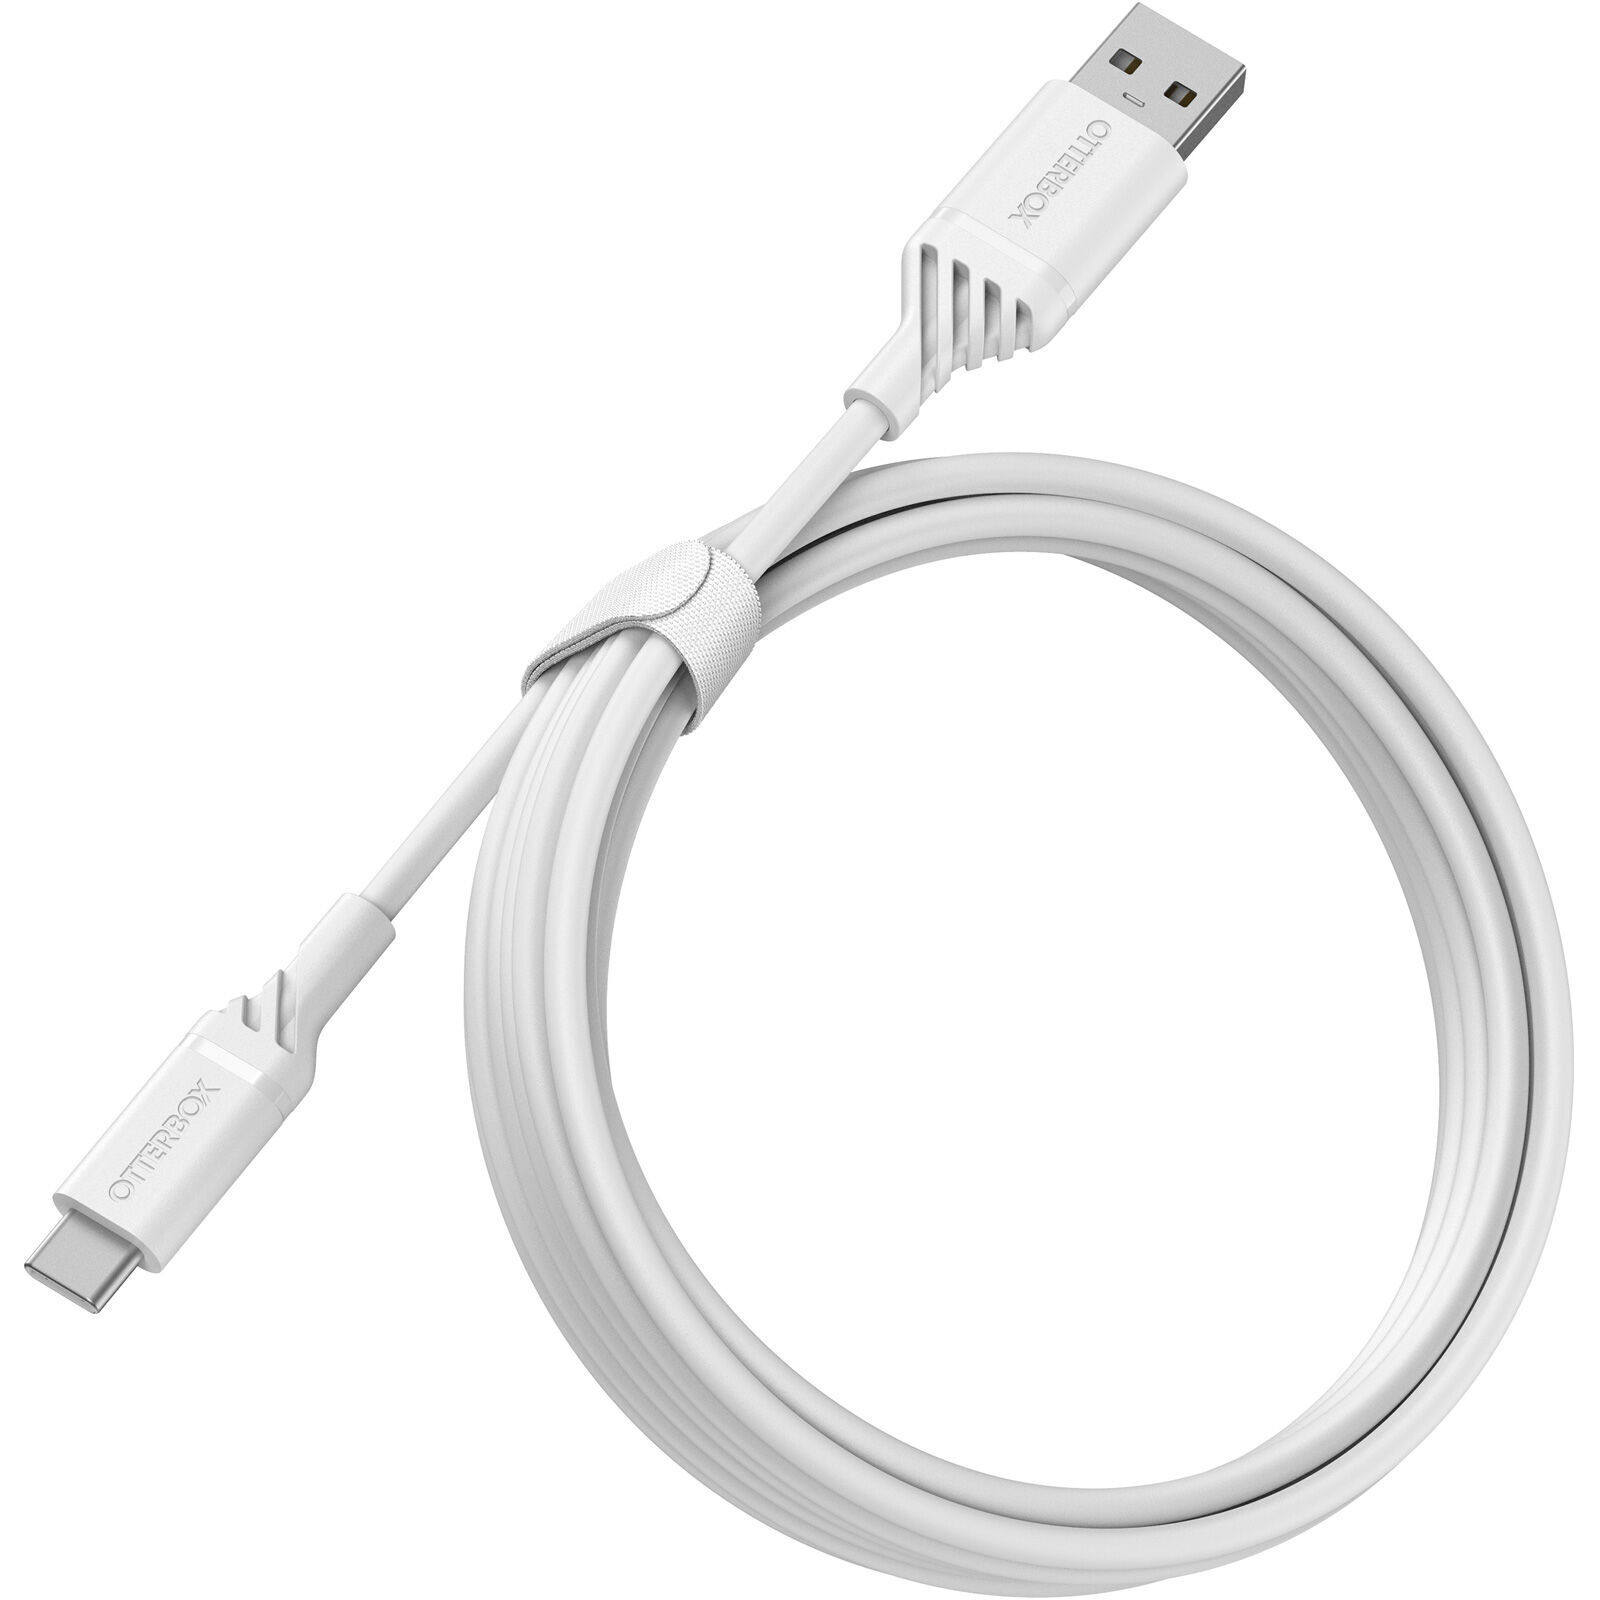 OtterBox USB-C to USB-A Cable (2M) - White (78-52660), USB 2.0, 3 AMPS (60W), Bend/Flex-Tested 3K Times, Durable & Flexible, 480 Mbps Transfer Rate